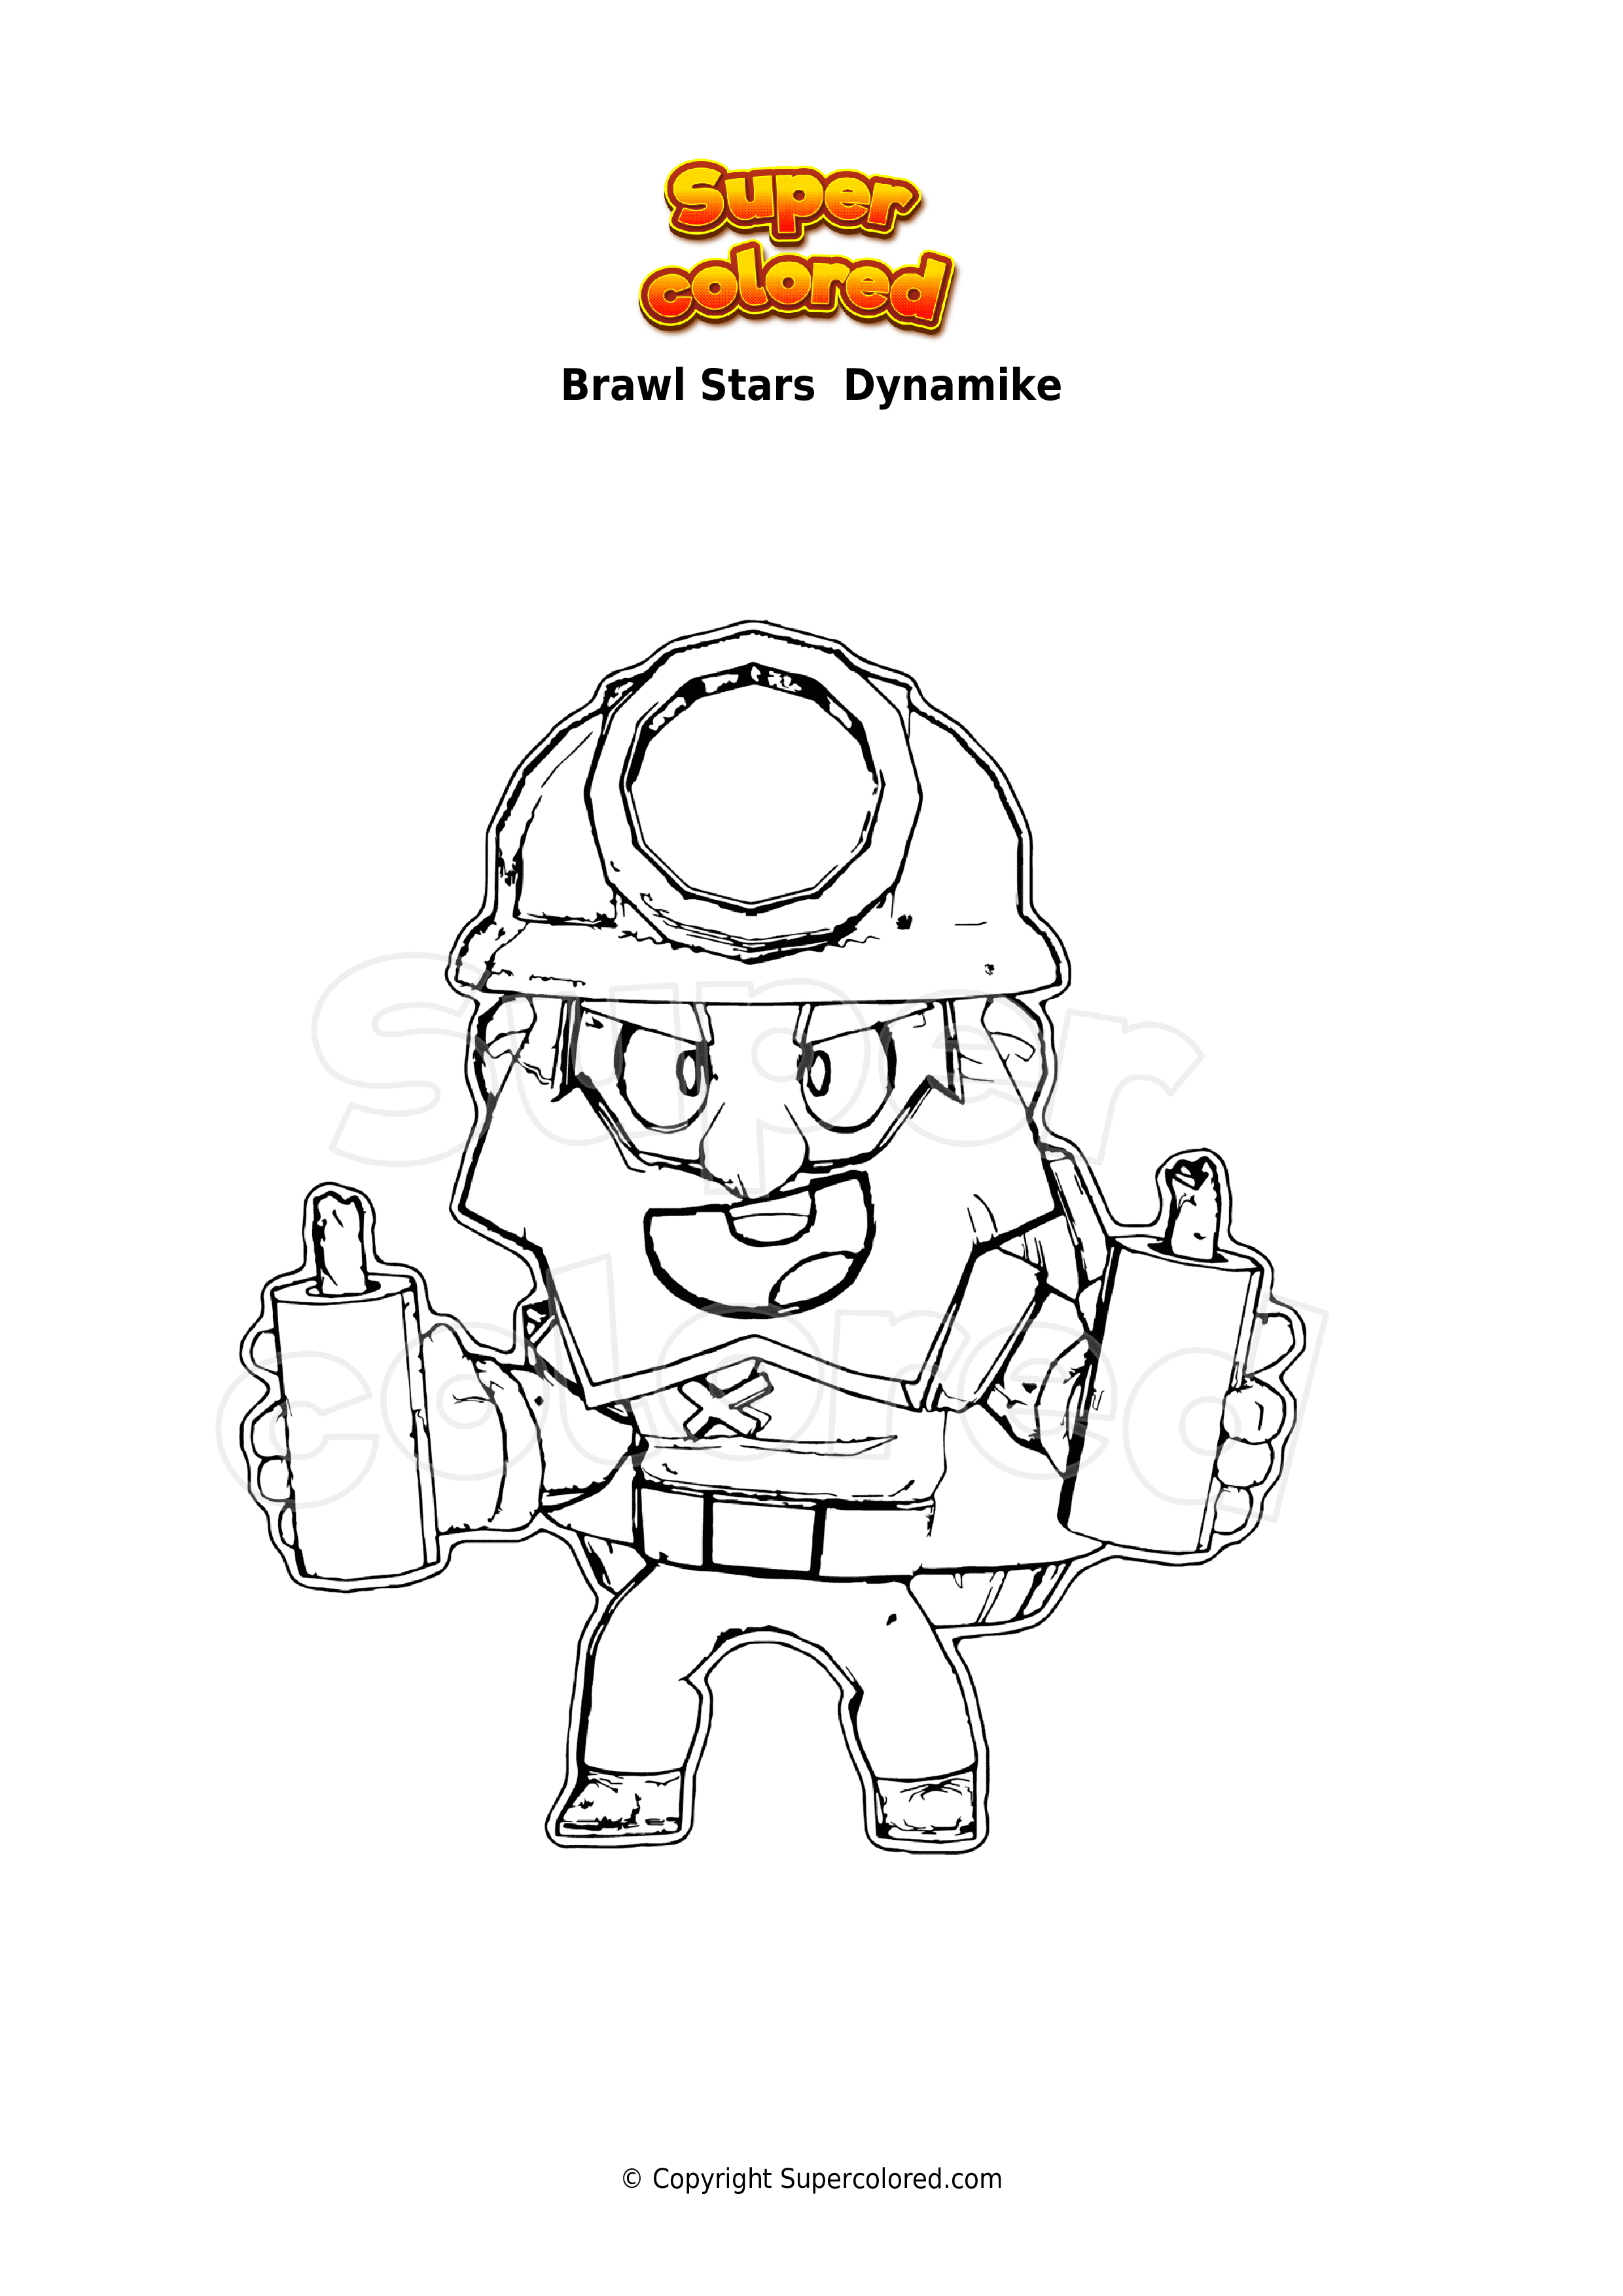 Coloring page Brawl Stars Dynamike - Supercolored.com